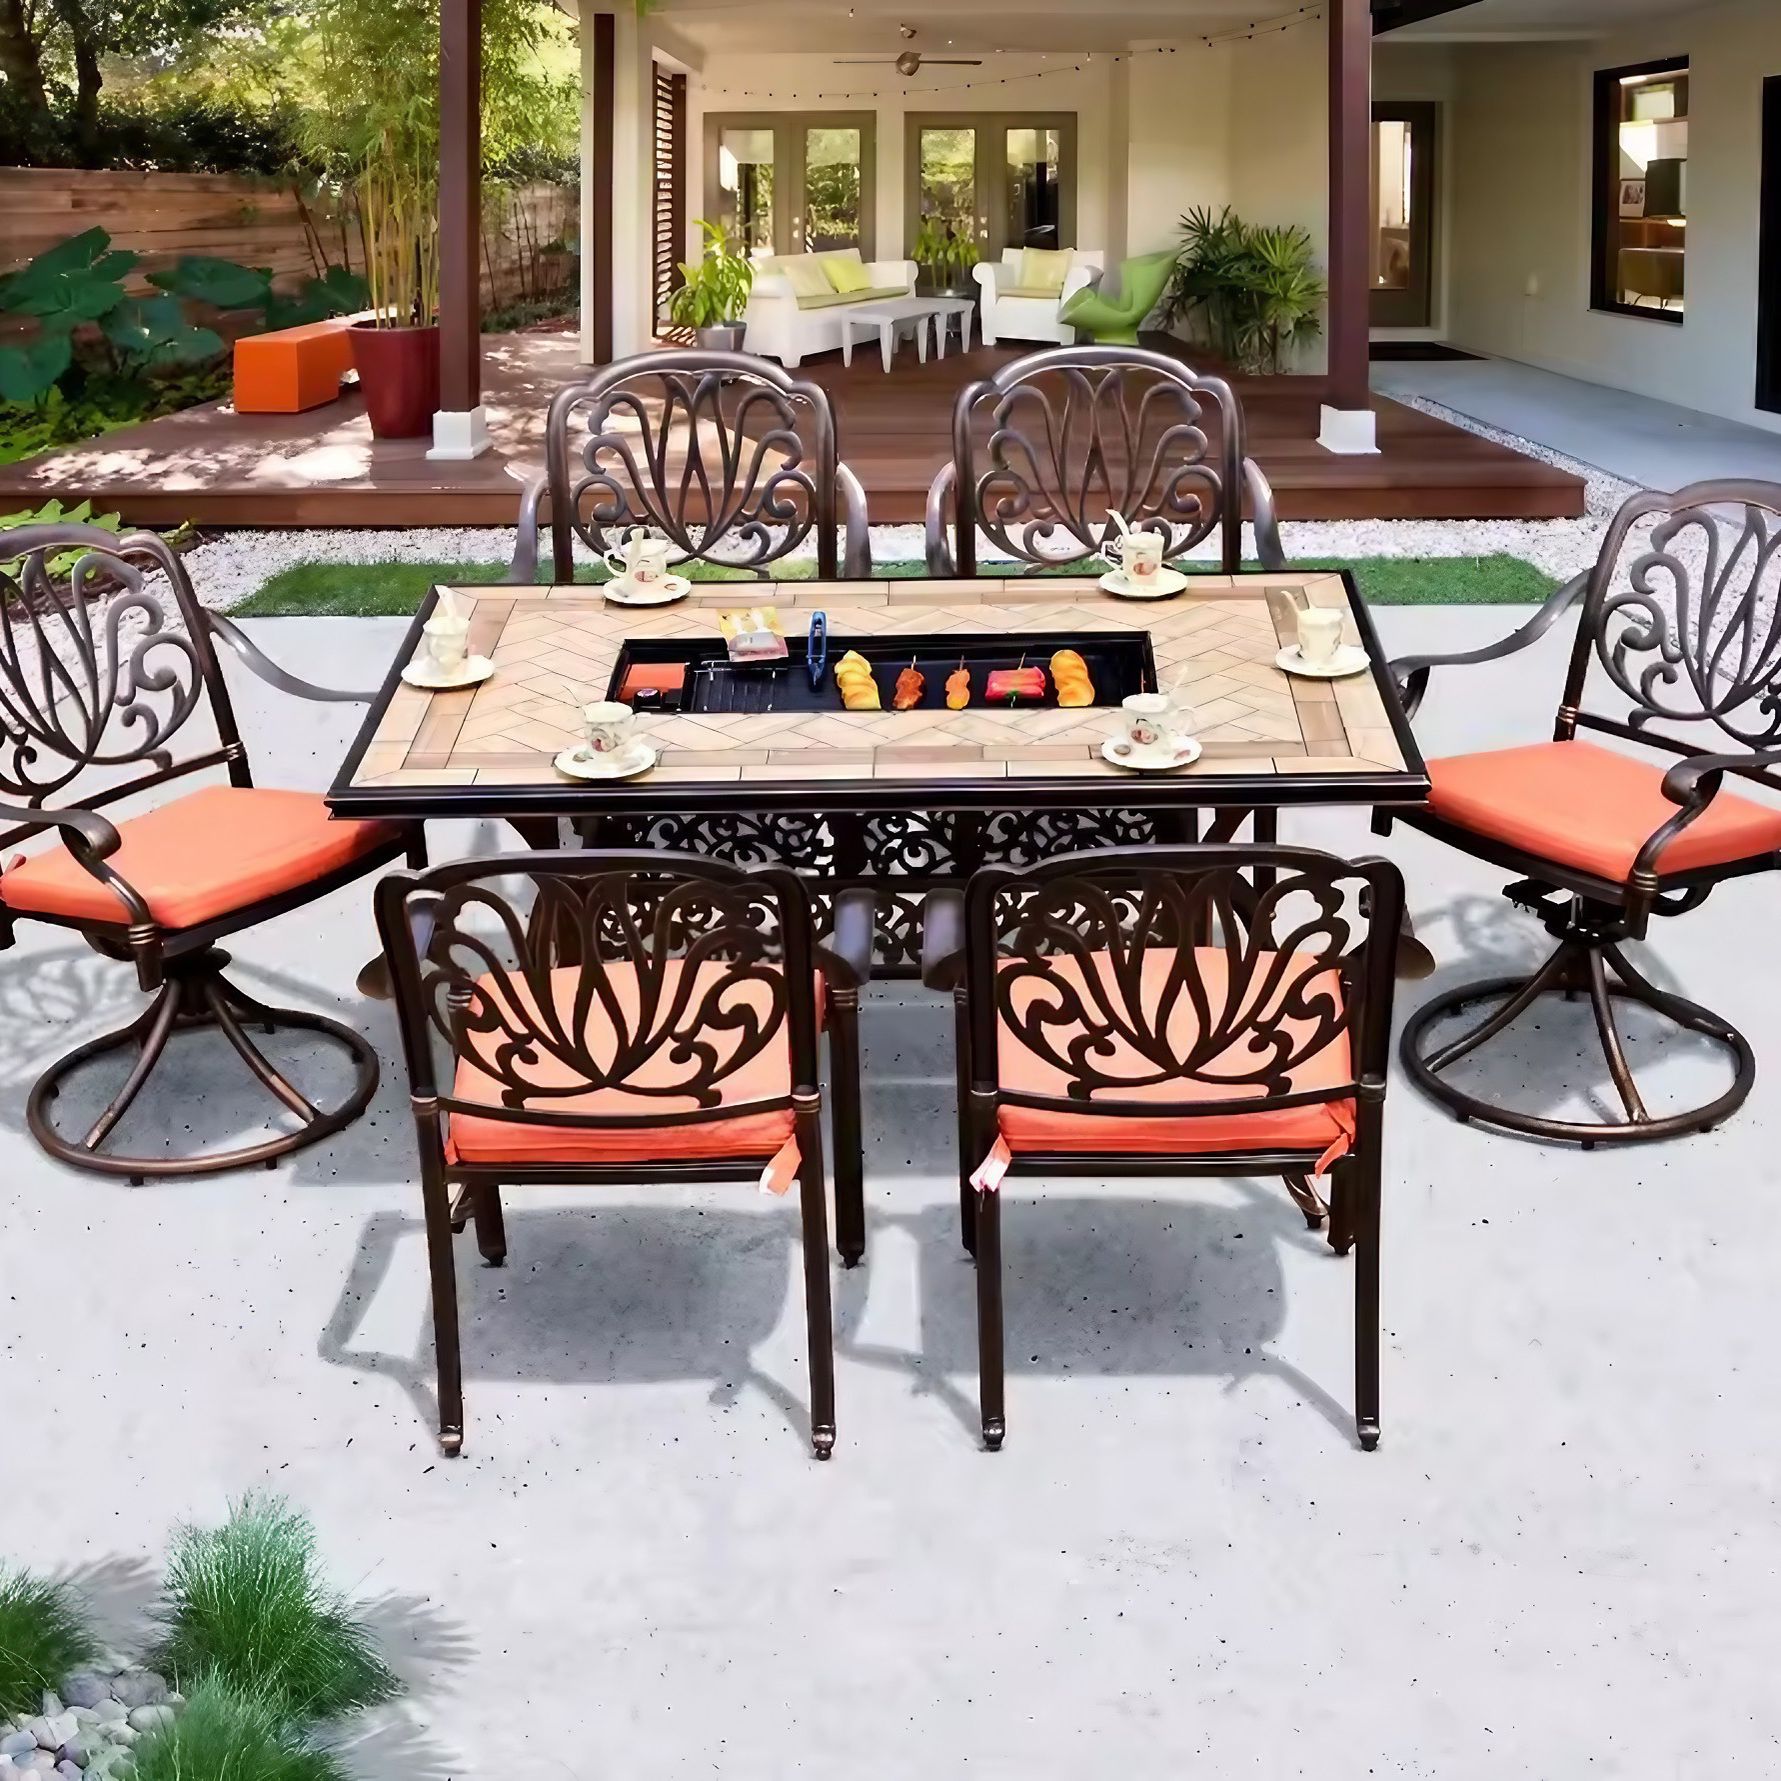 Dining table outdoor patio set BBQ grill with six heavy duty chairs carved tile top